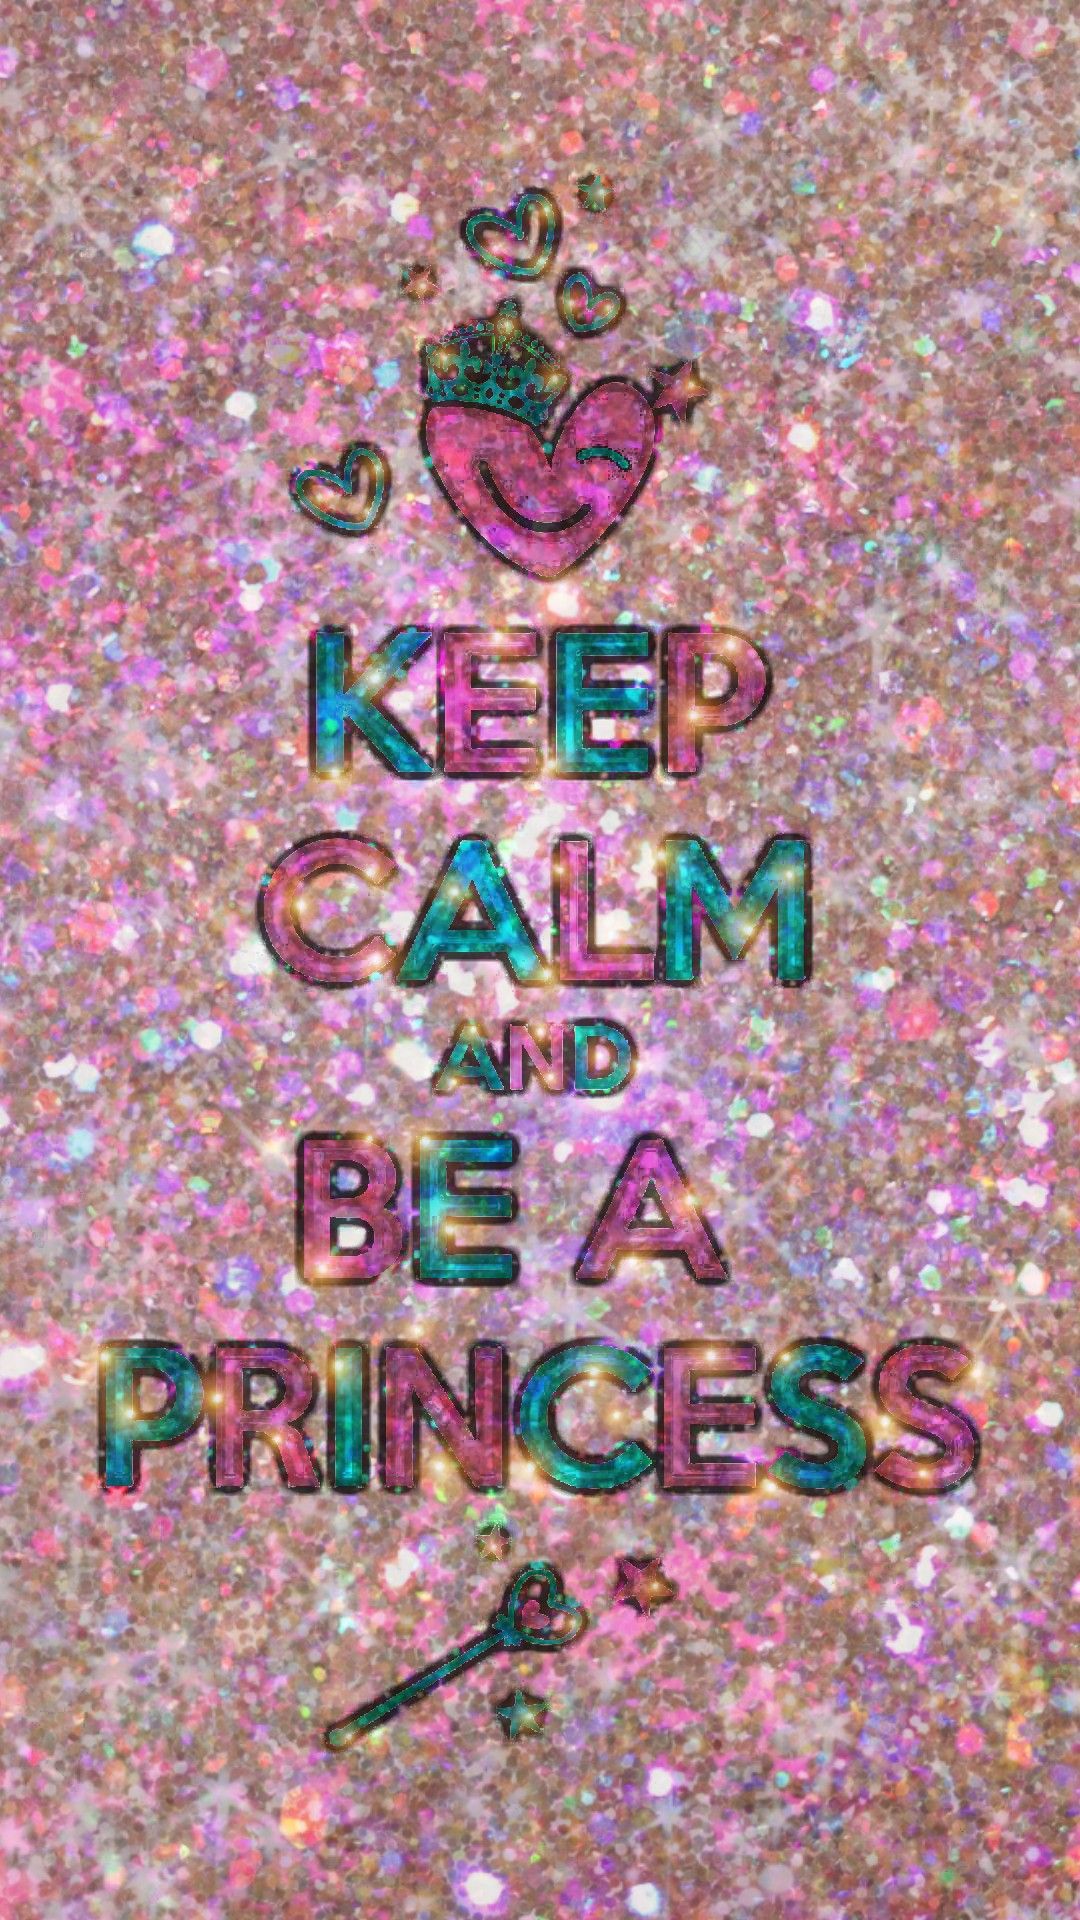 Keep Calm and Be A Princess, made by me #pink #girly #glitter #sparkles # wallpaper #background. Glitter wallpaper, Glitter phone wallpaper, Background picture